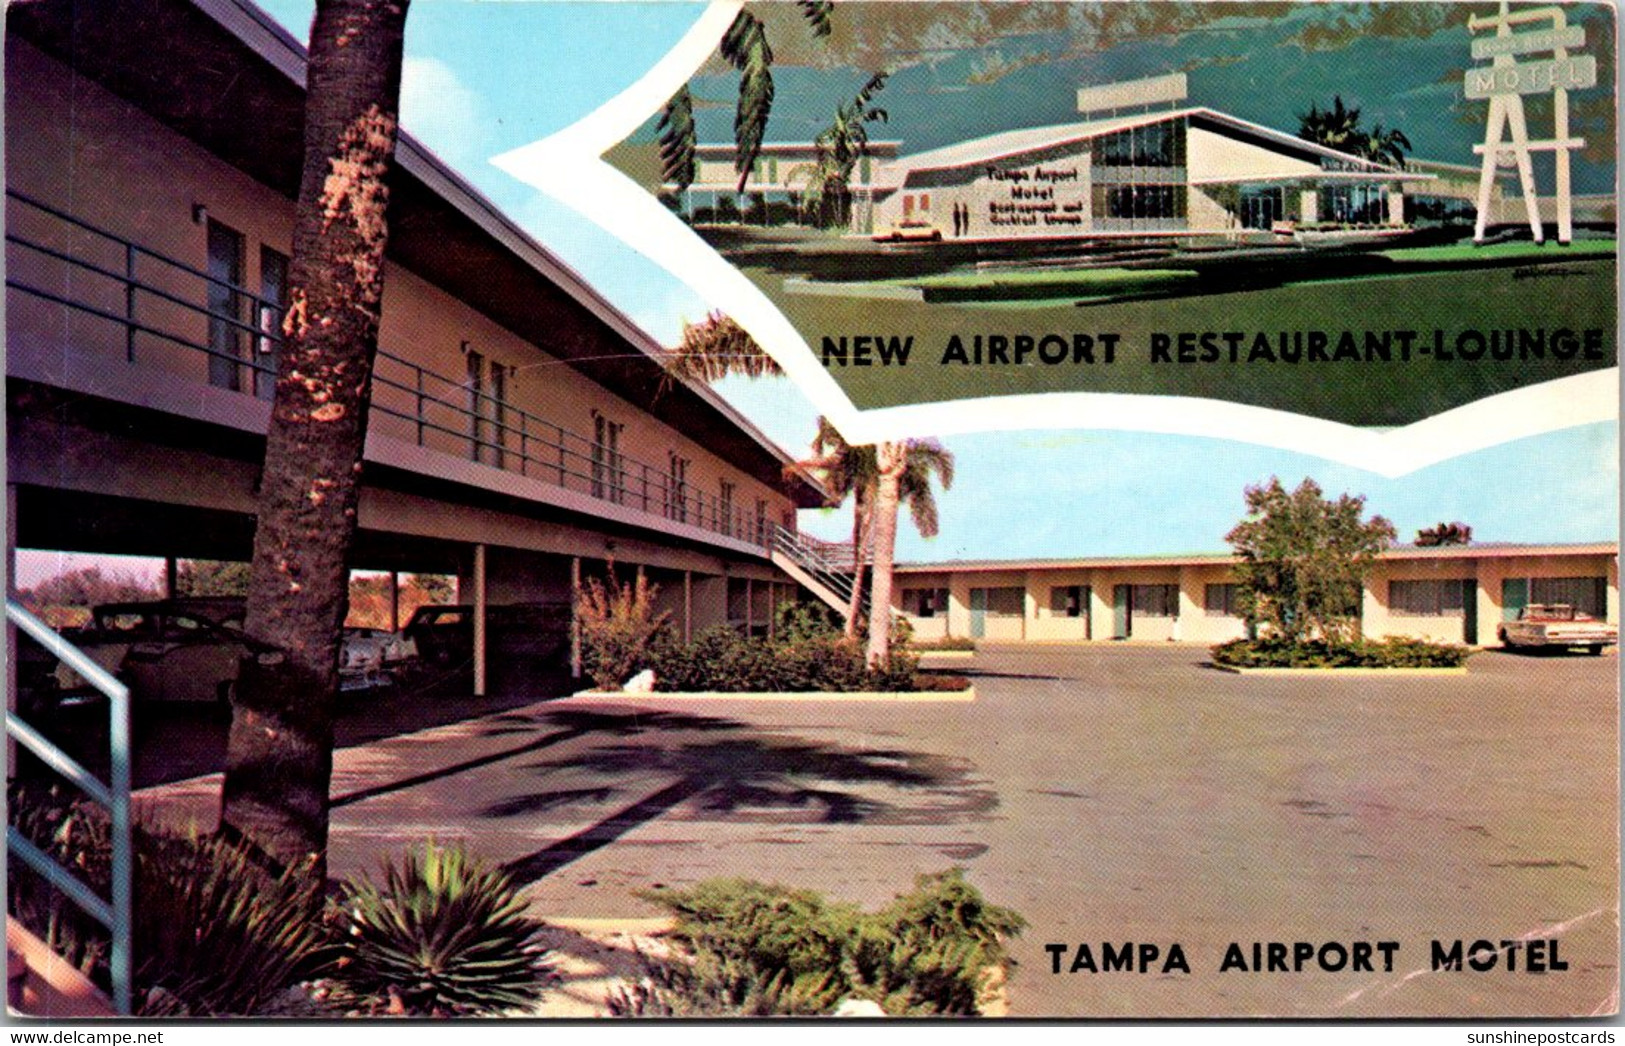 Florida Tampa Airport Motel And New Restaurant & Lounge - Tampa